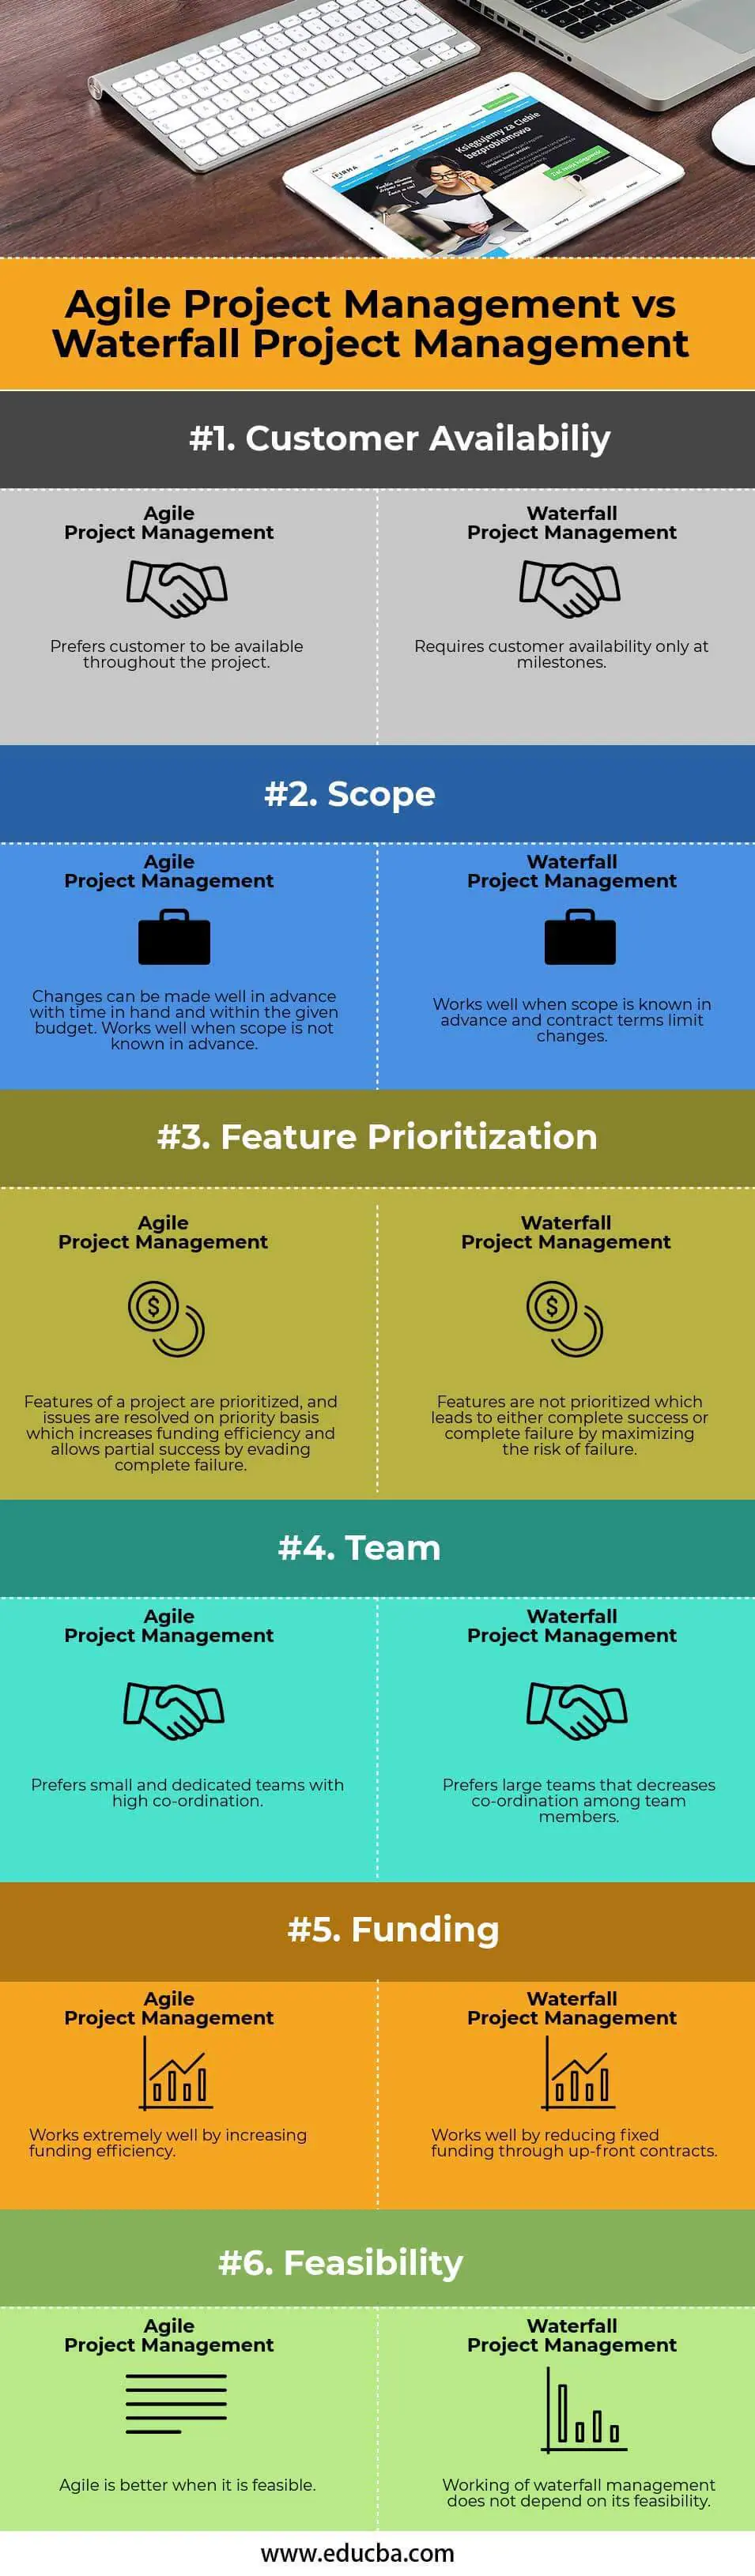 Agile Project Management vs Waterfall Project Management info